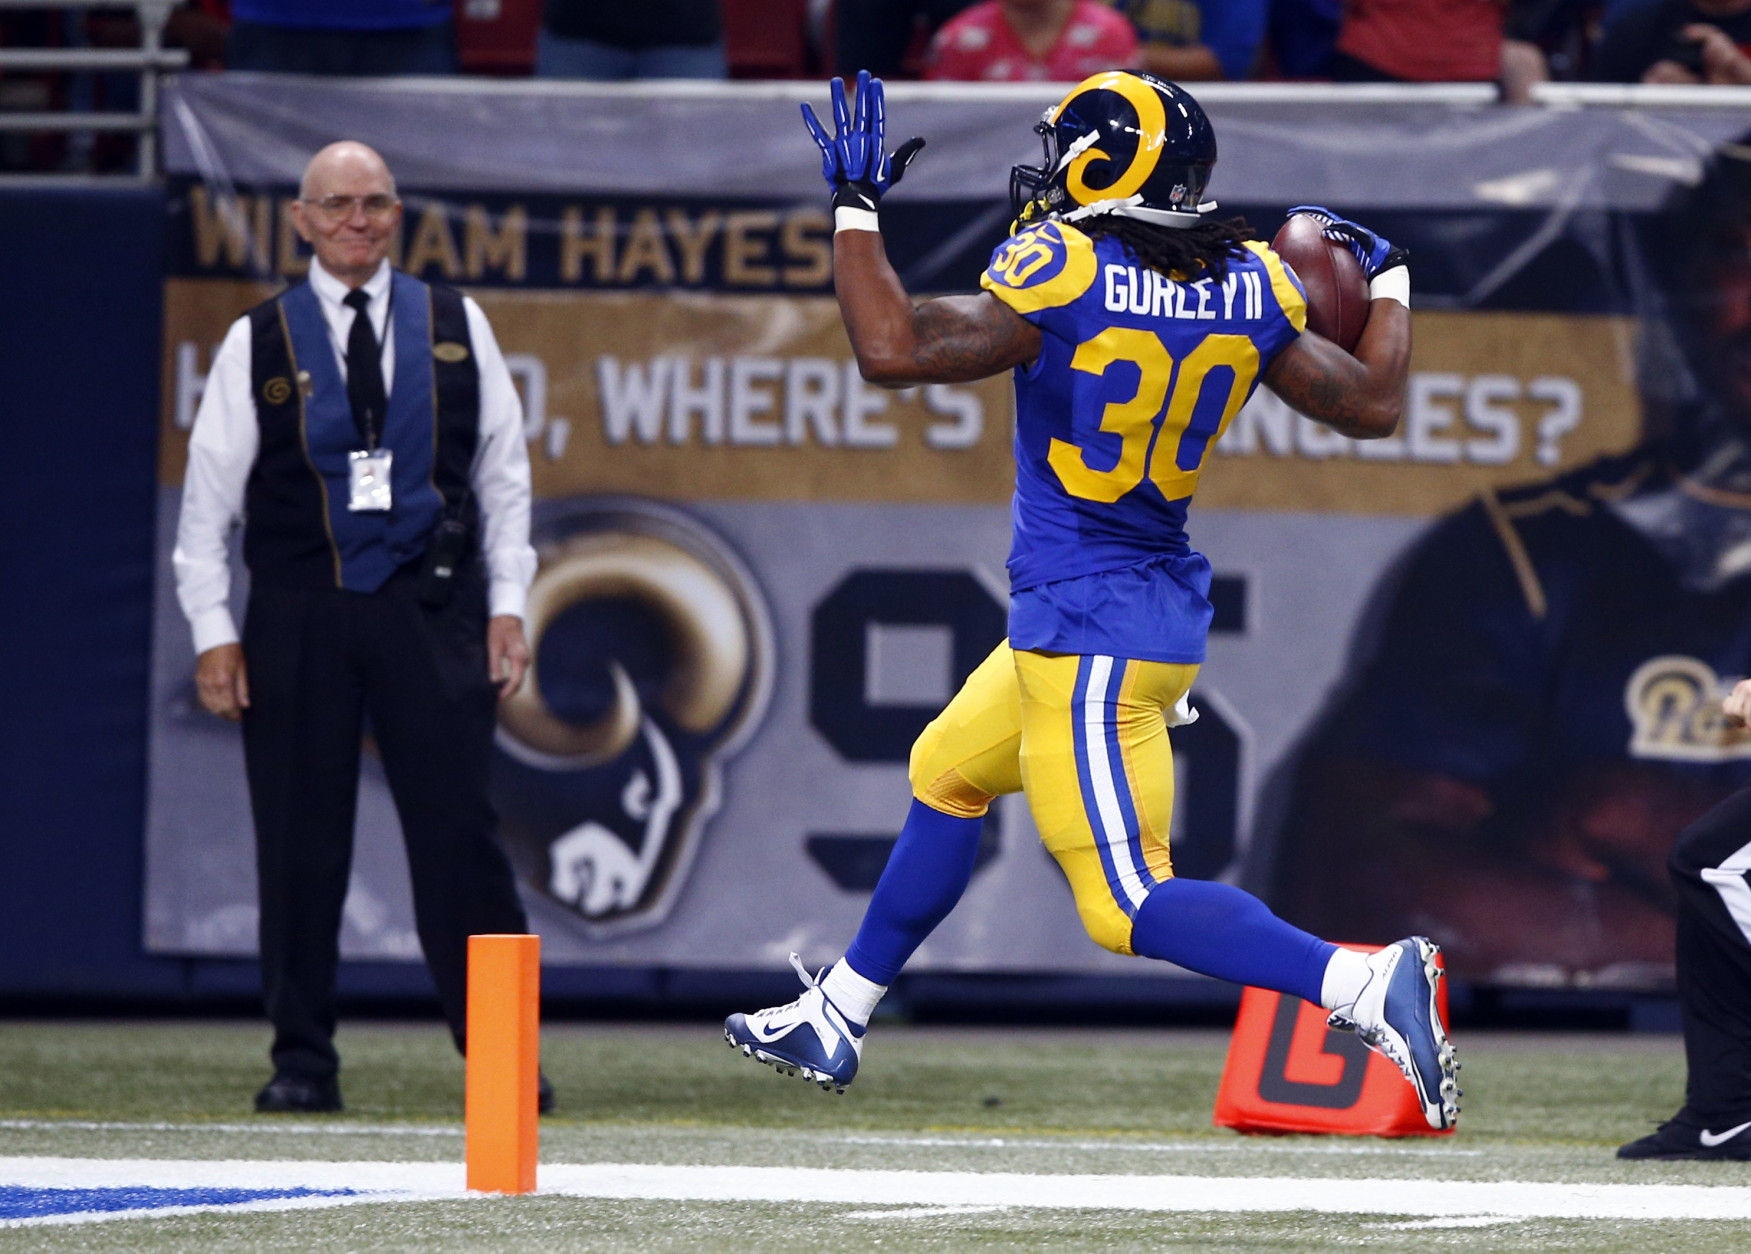 St. Louis Rams running back Todd Gurley scores on a 71-yard run during the second quarter of an NFL football game against the San Francisco 49ers, Sunday, Nov. 1, 2015, in St. Louis. (AP Photo/Billy Hurst)